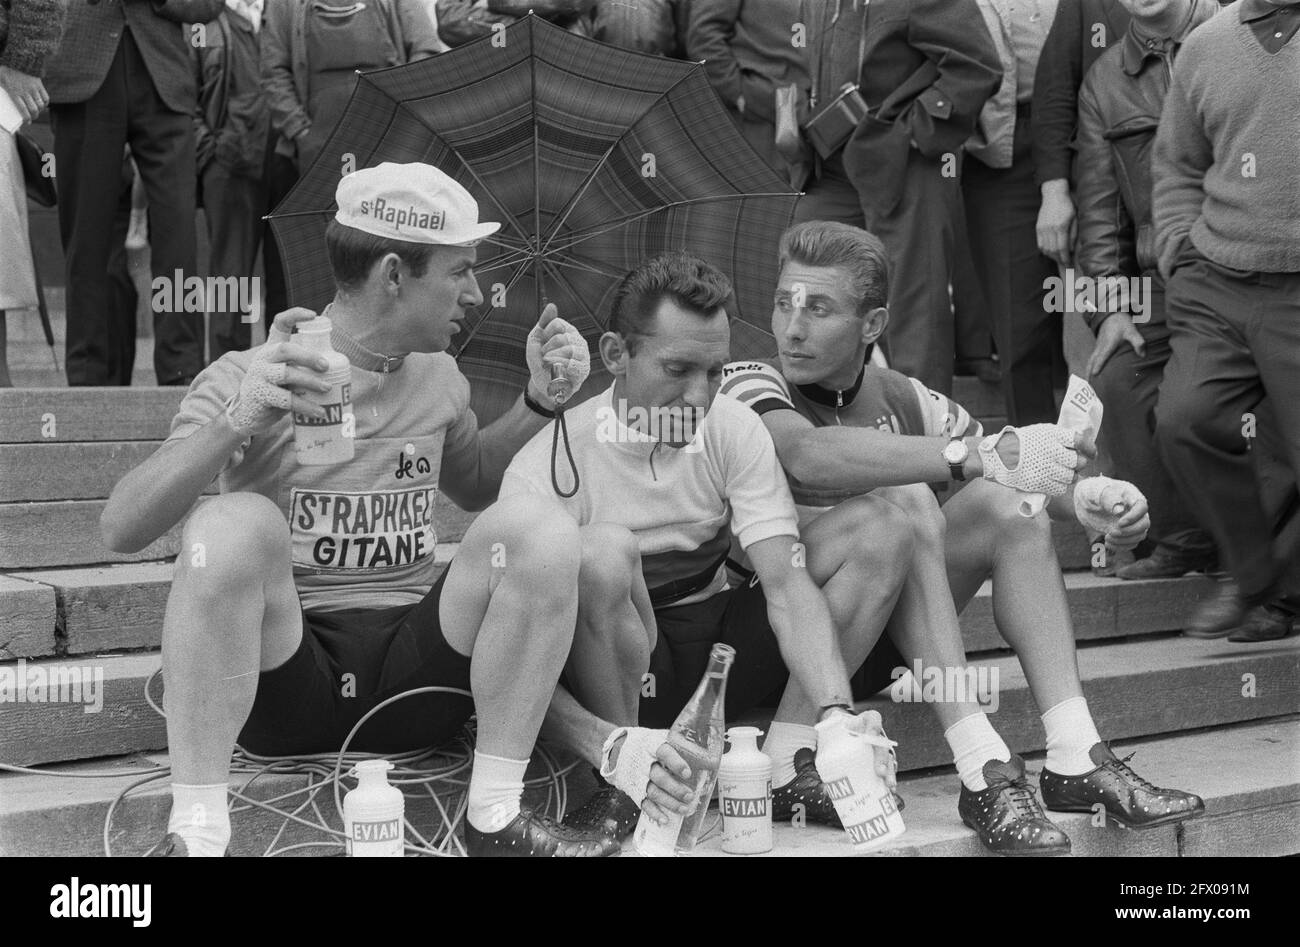 Seamus Elliott, Jean Stablinski and Jacques Anquetil, Tour de France 1963, The Netherlands, 20th century press agency photo, news to remember, documentary, historic photography 1945-1990, visual stories, human history of the Twentieth Century, capturing moments in time Stock Photo